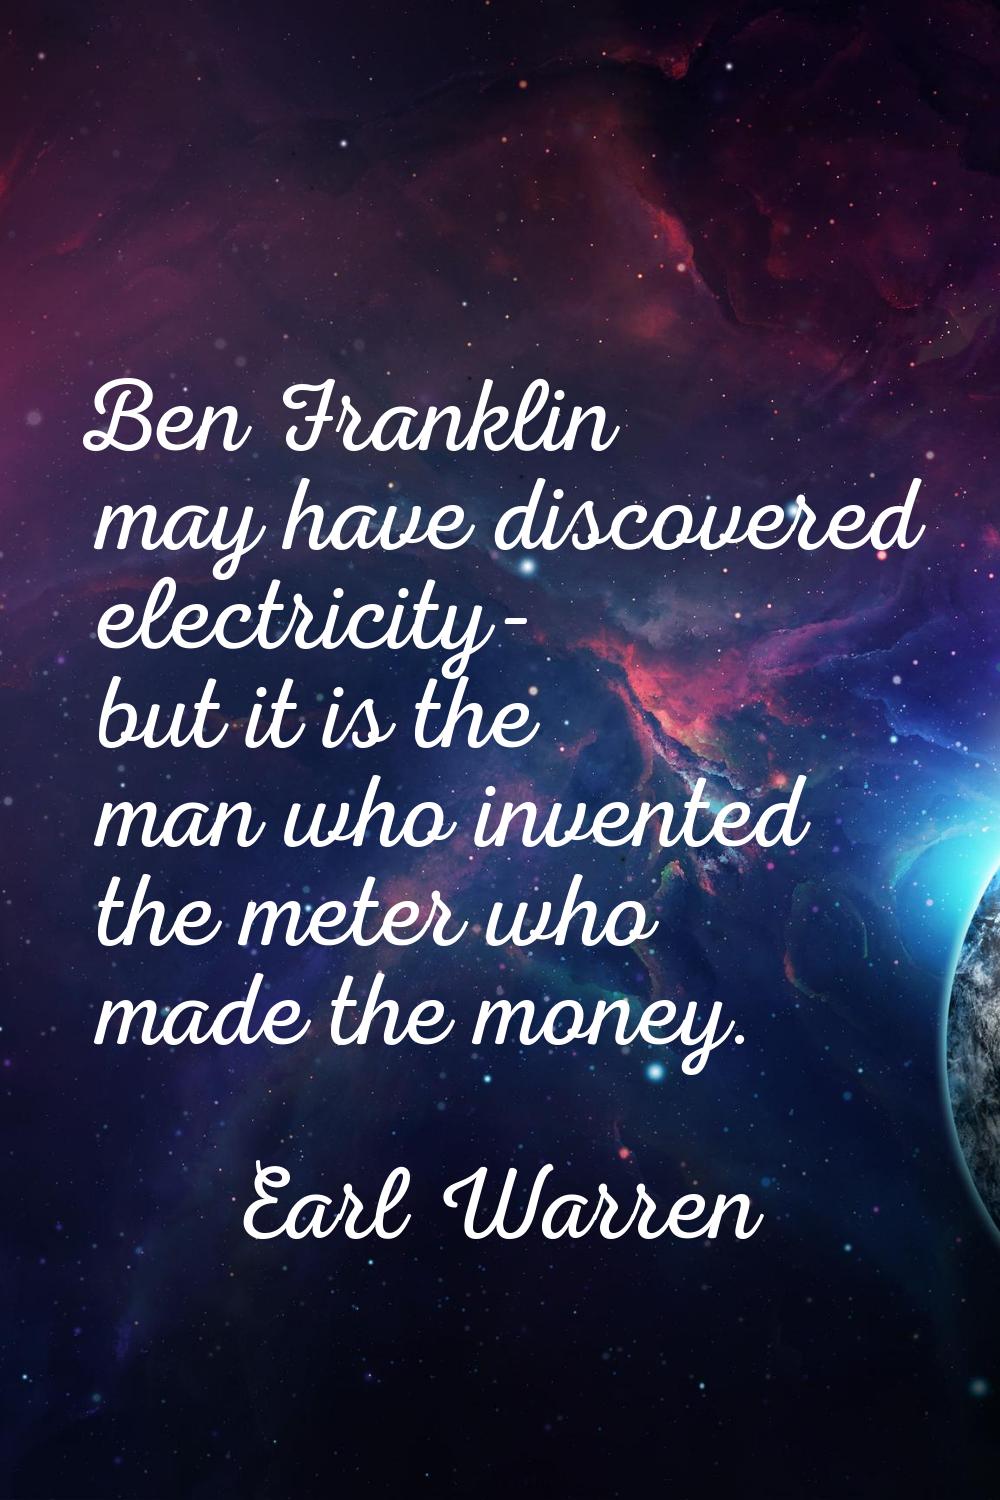 Ben Franklin may have discovered electricity- but it is the man who invented the meter who made the